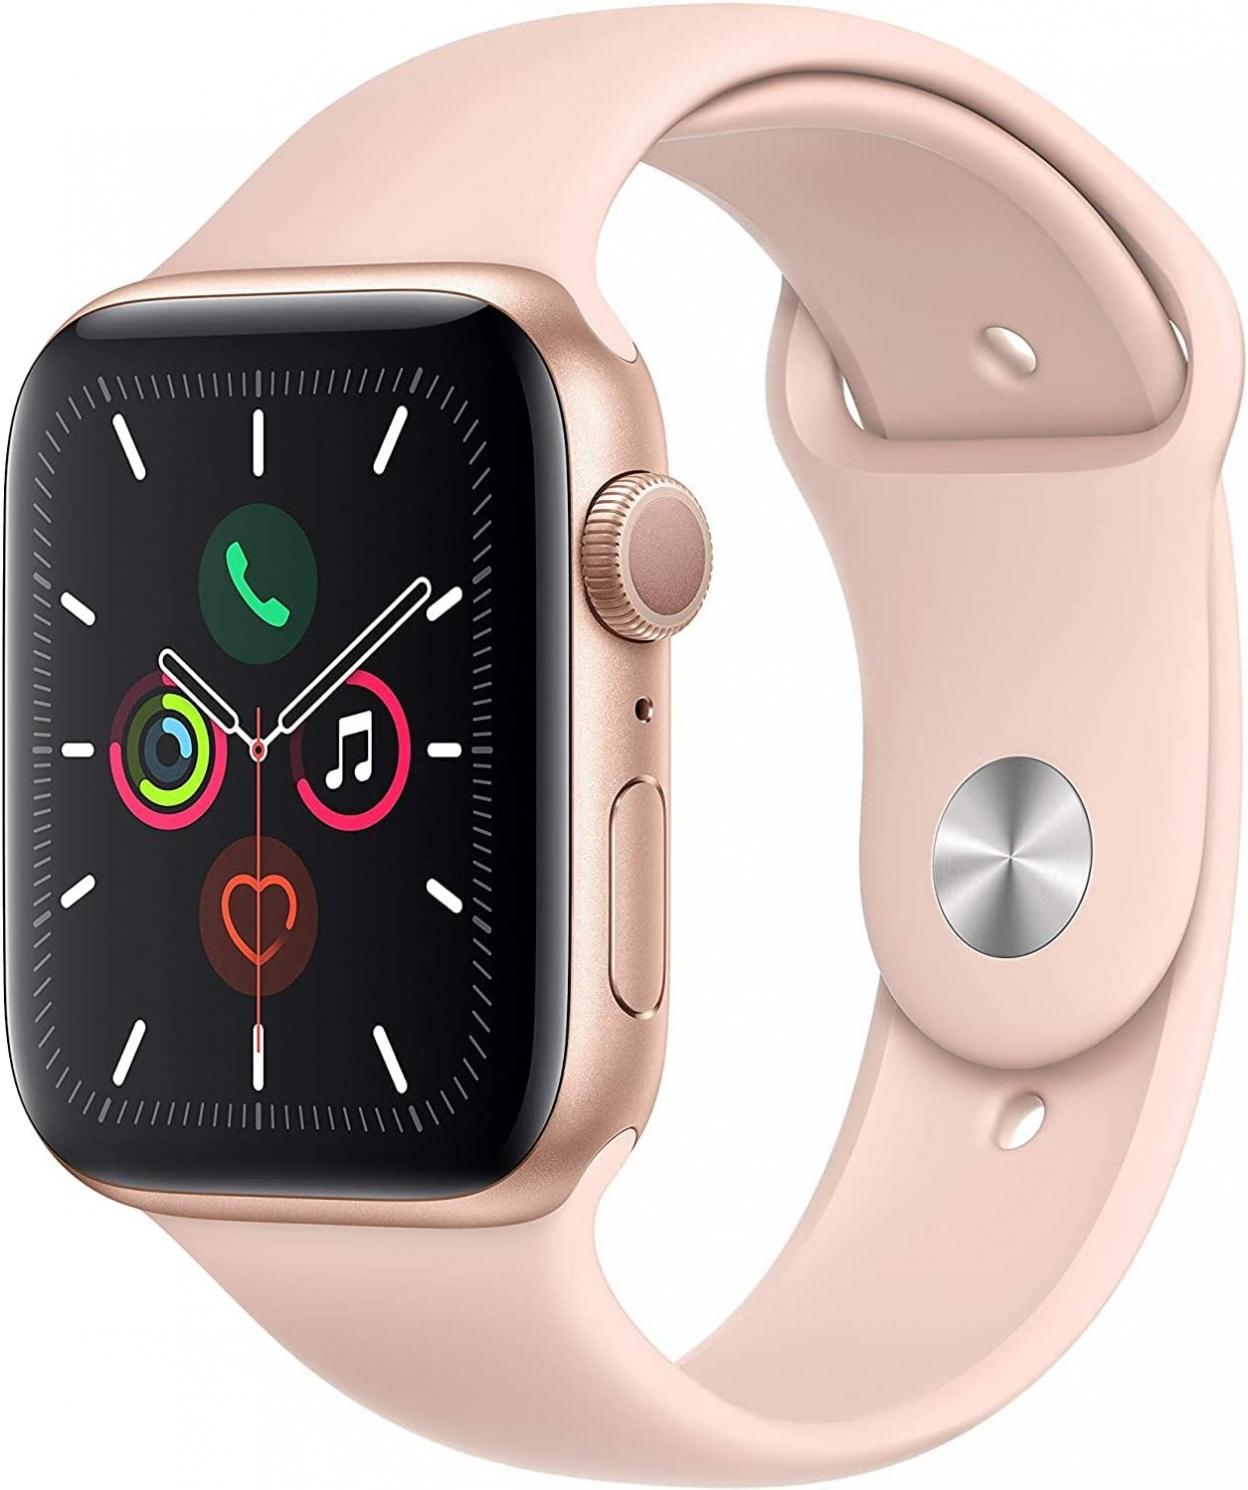 Apple Watch Series 5 (GPS, 44MM) - Gold Aluminum Case with Pink Sand Sport Band (Renewed Premium)